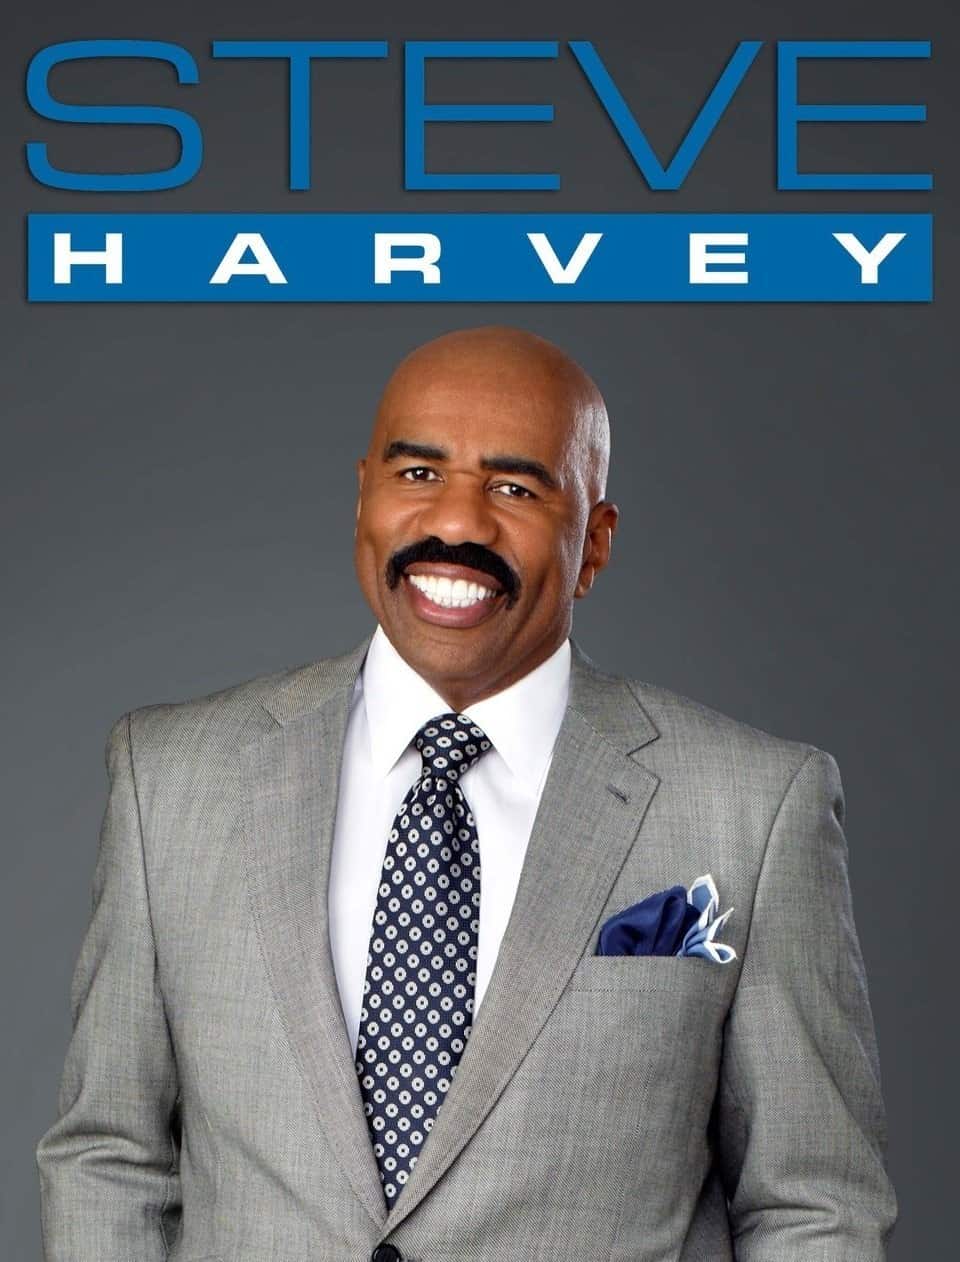 "Steve Harvey" was a daytime talk show that aired for five seasons, from September 4, 2012, to July 13, 2017